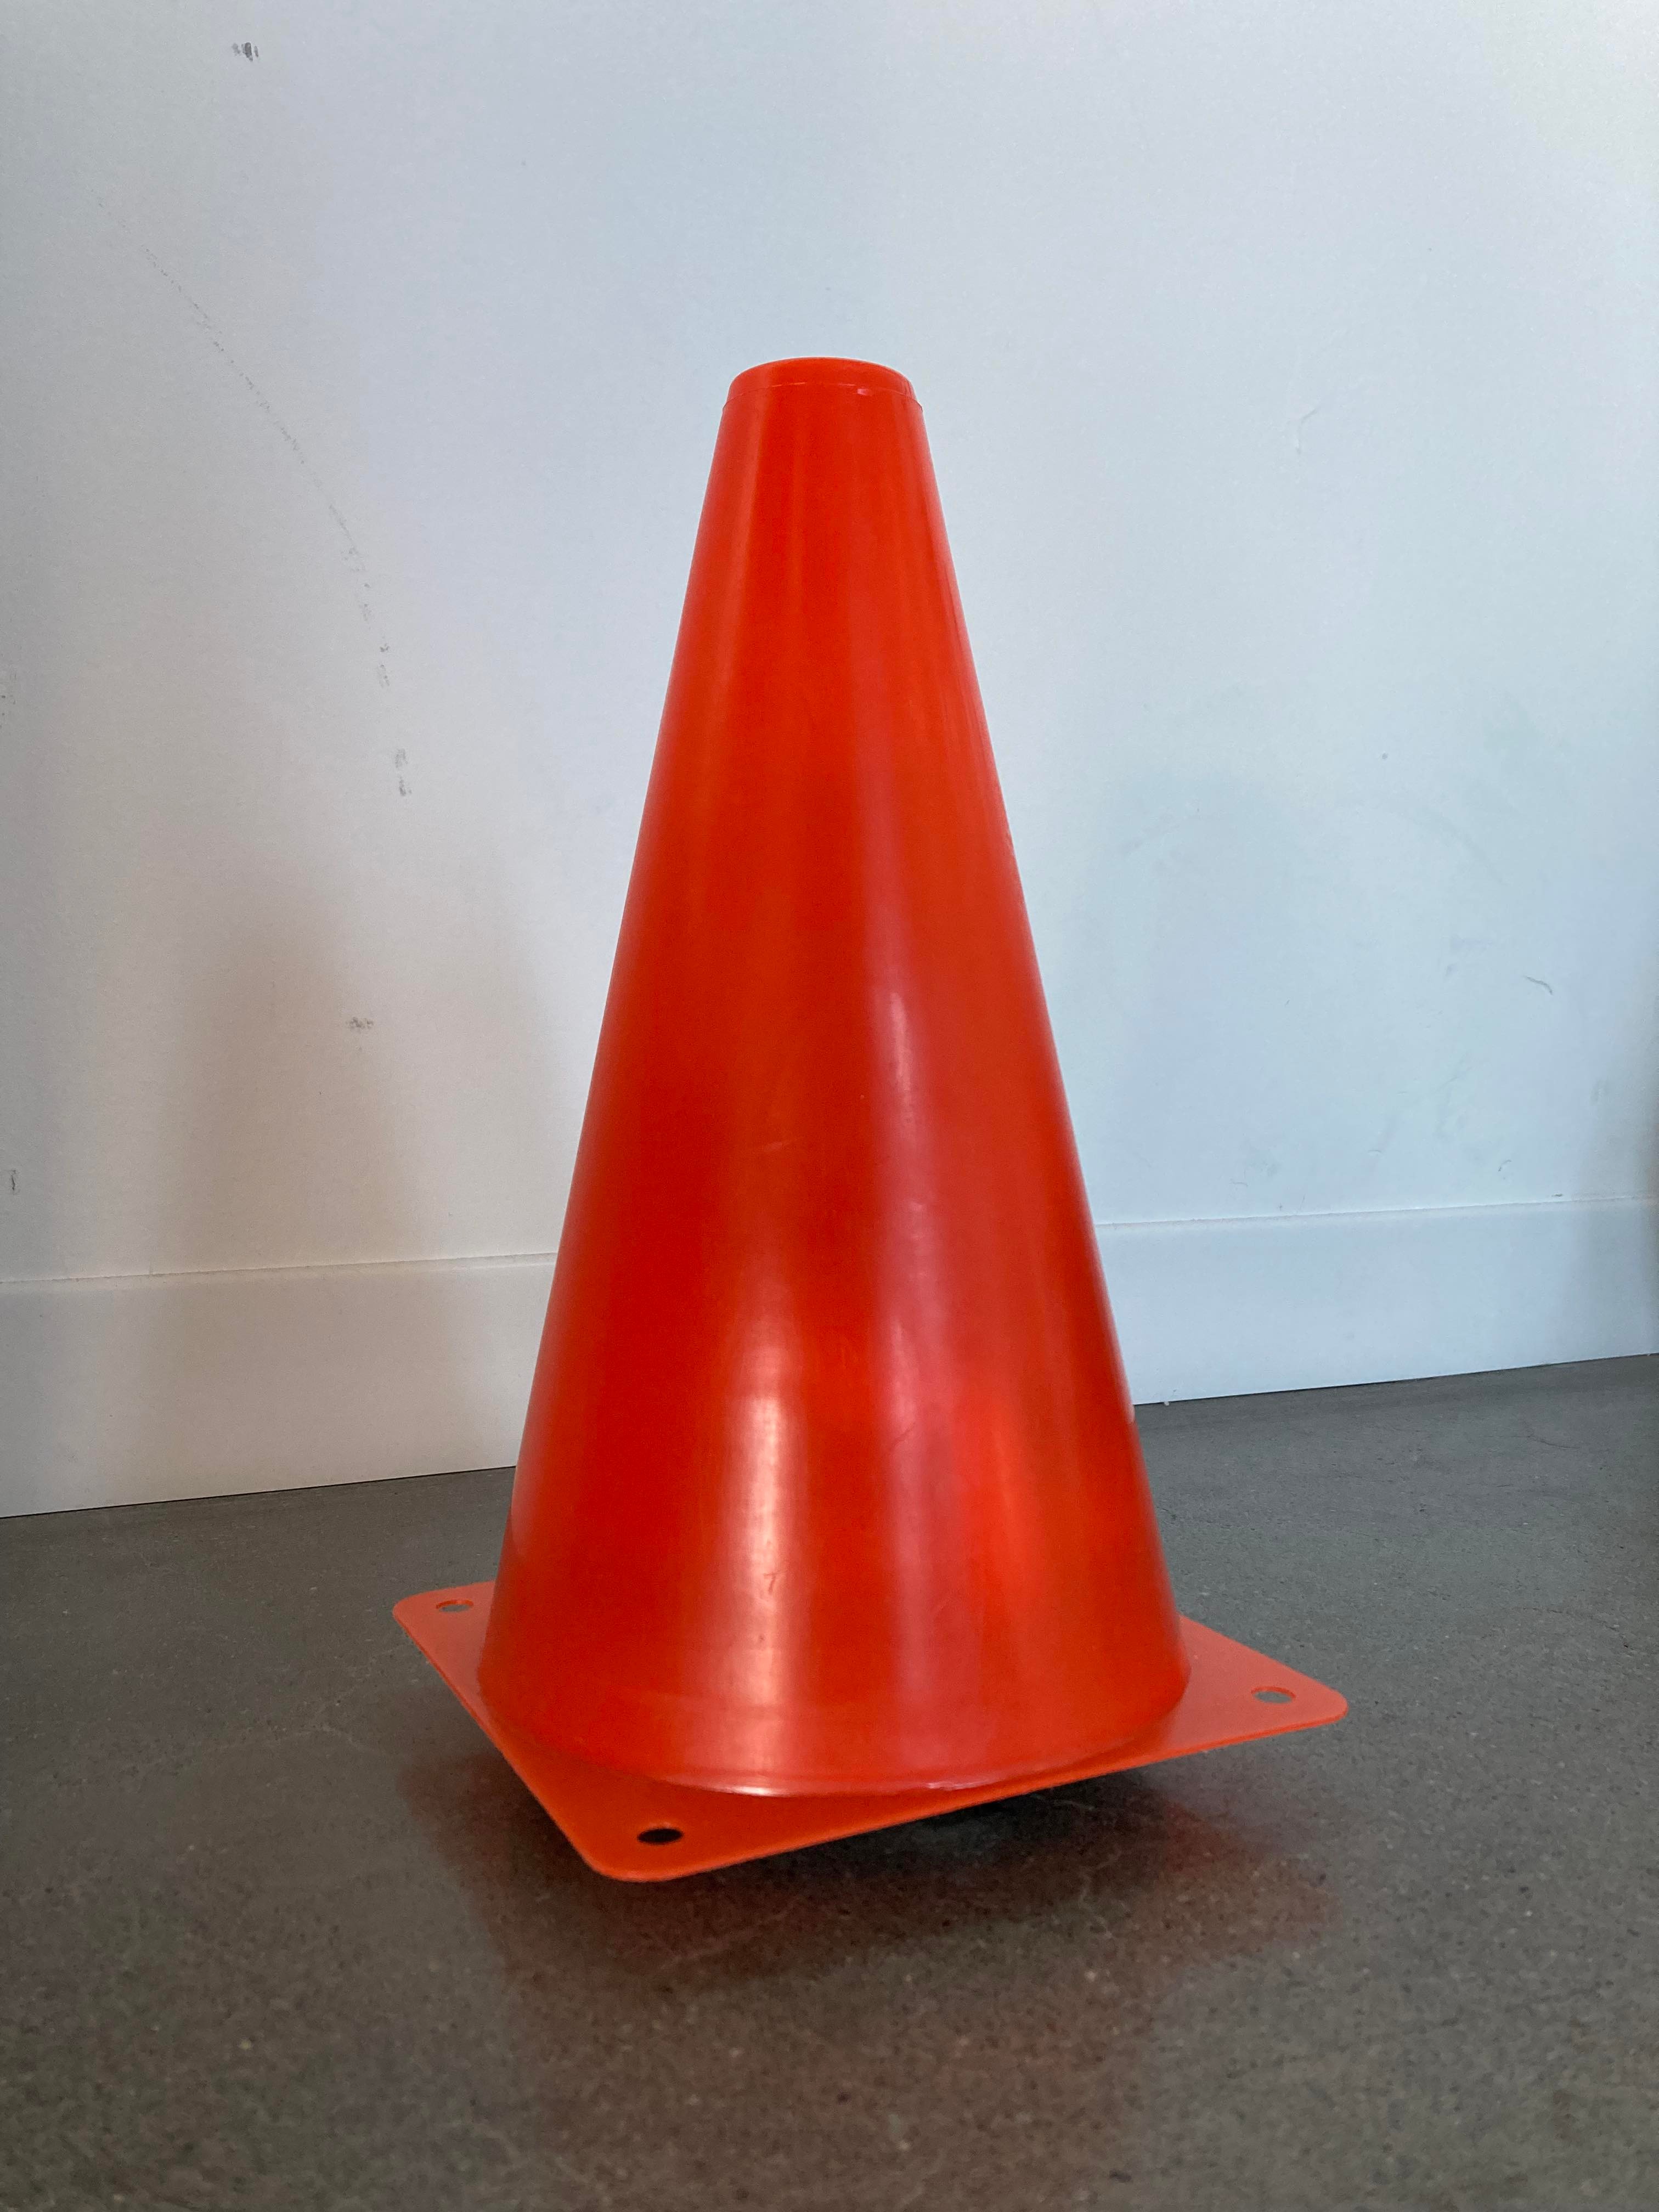 ConeBot in the wild